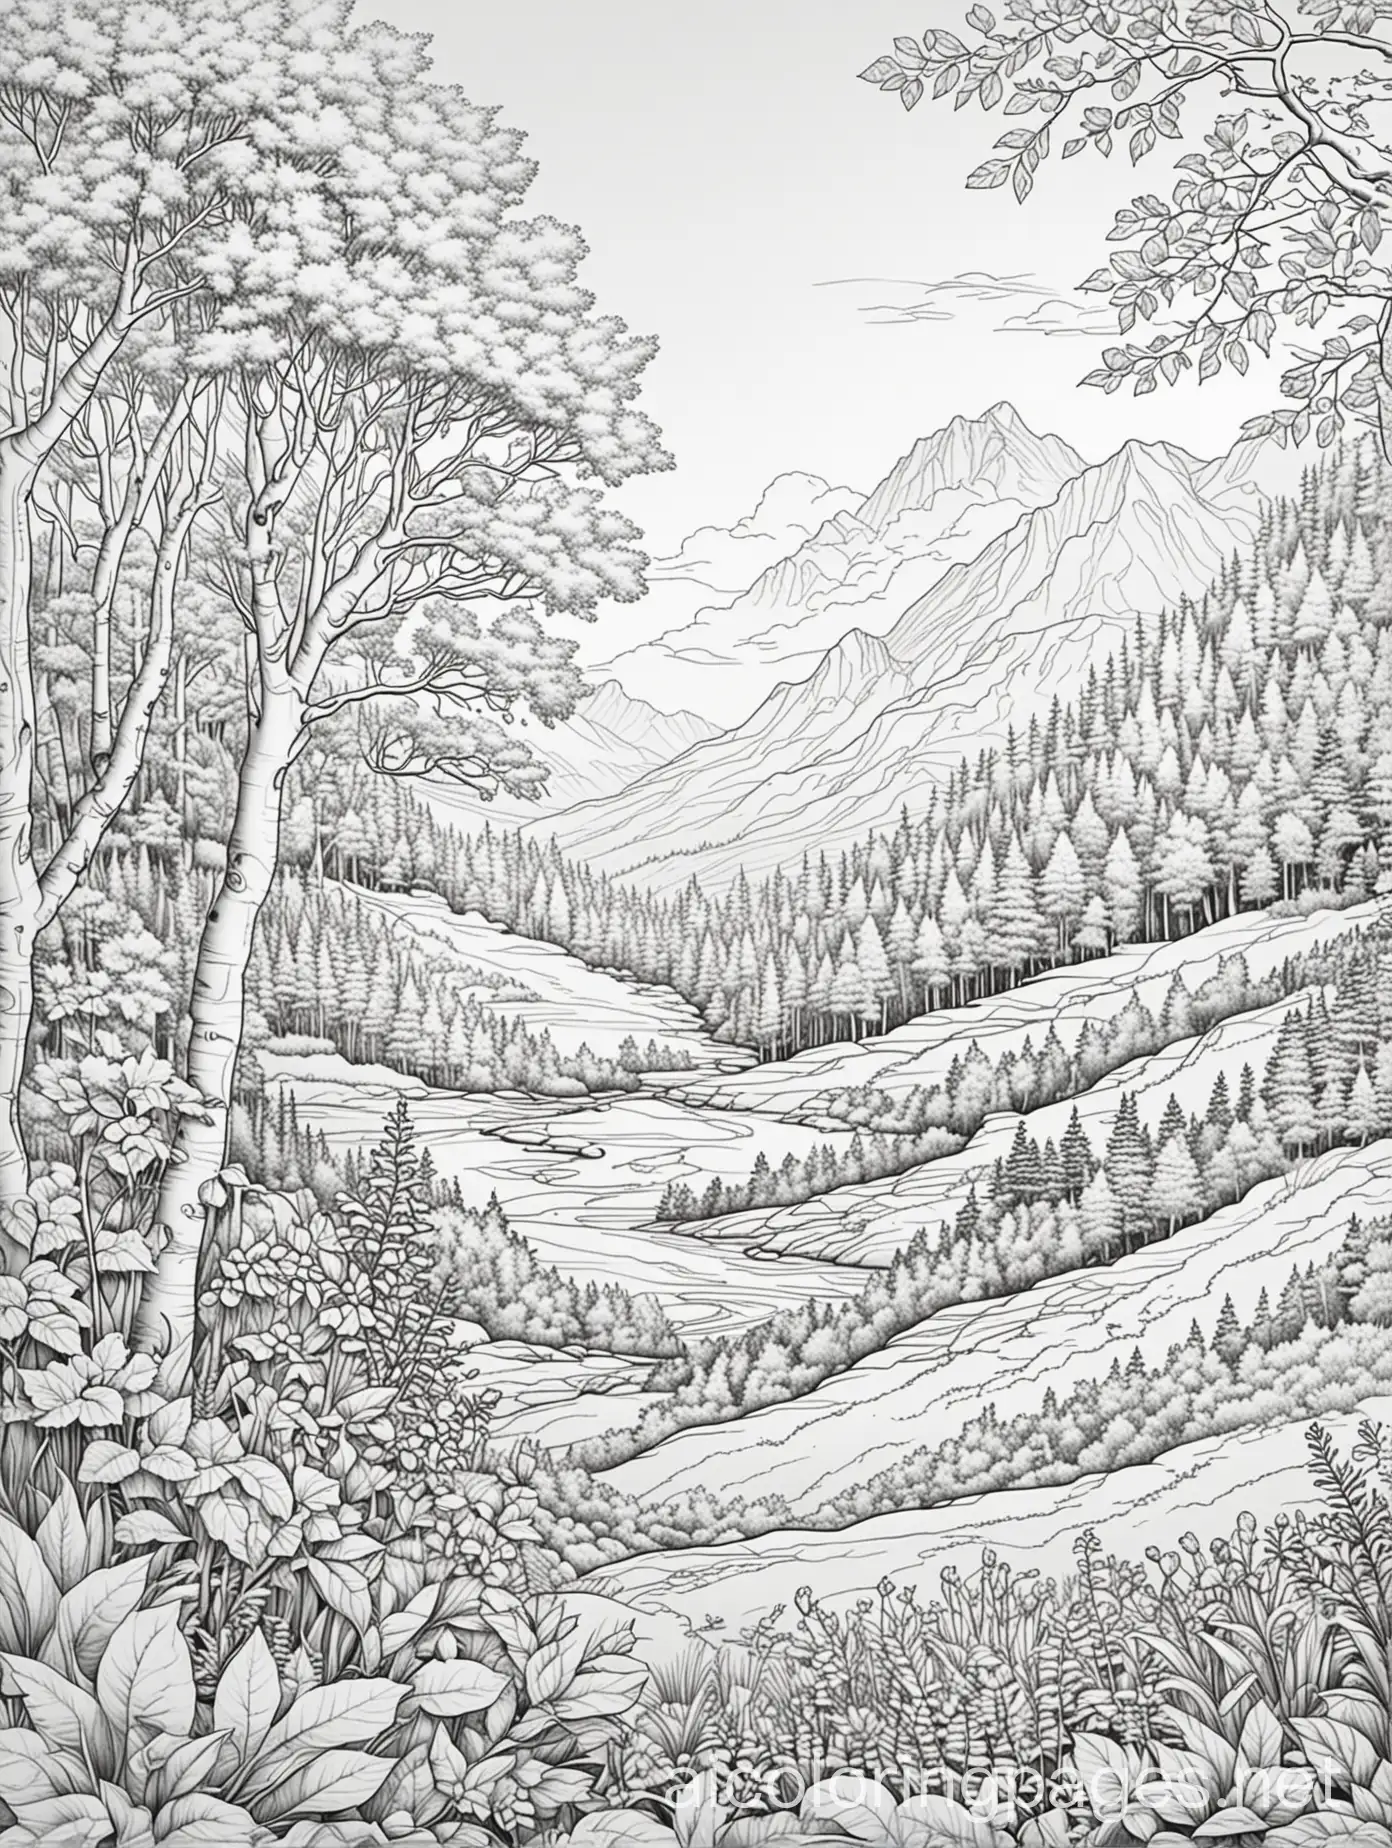 Beautiful image of nature, Coloring Page, black and white, line art, white background, Simplicity, Ample White Space. The background of the coloring page is plain white to make it easy for young children to color within the lines. The outlines of all the subjects are easy to distinguish, making it simple for kids to color without too much difficulty